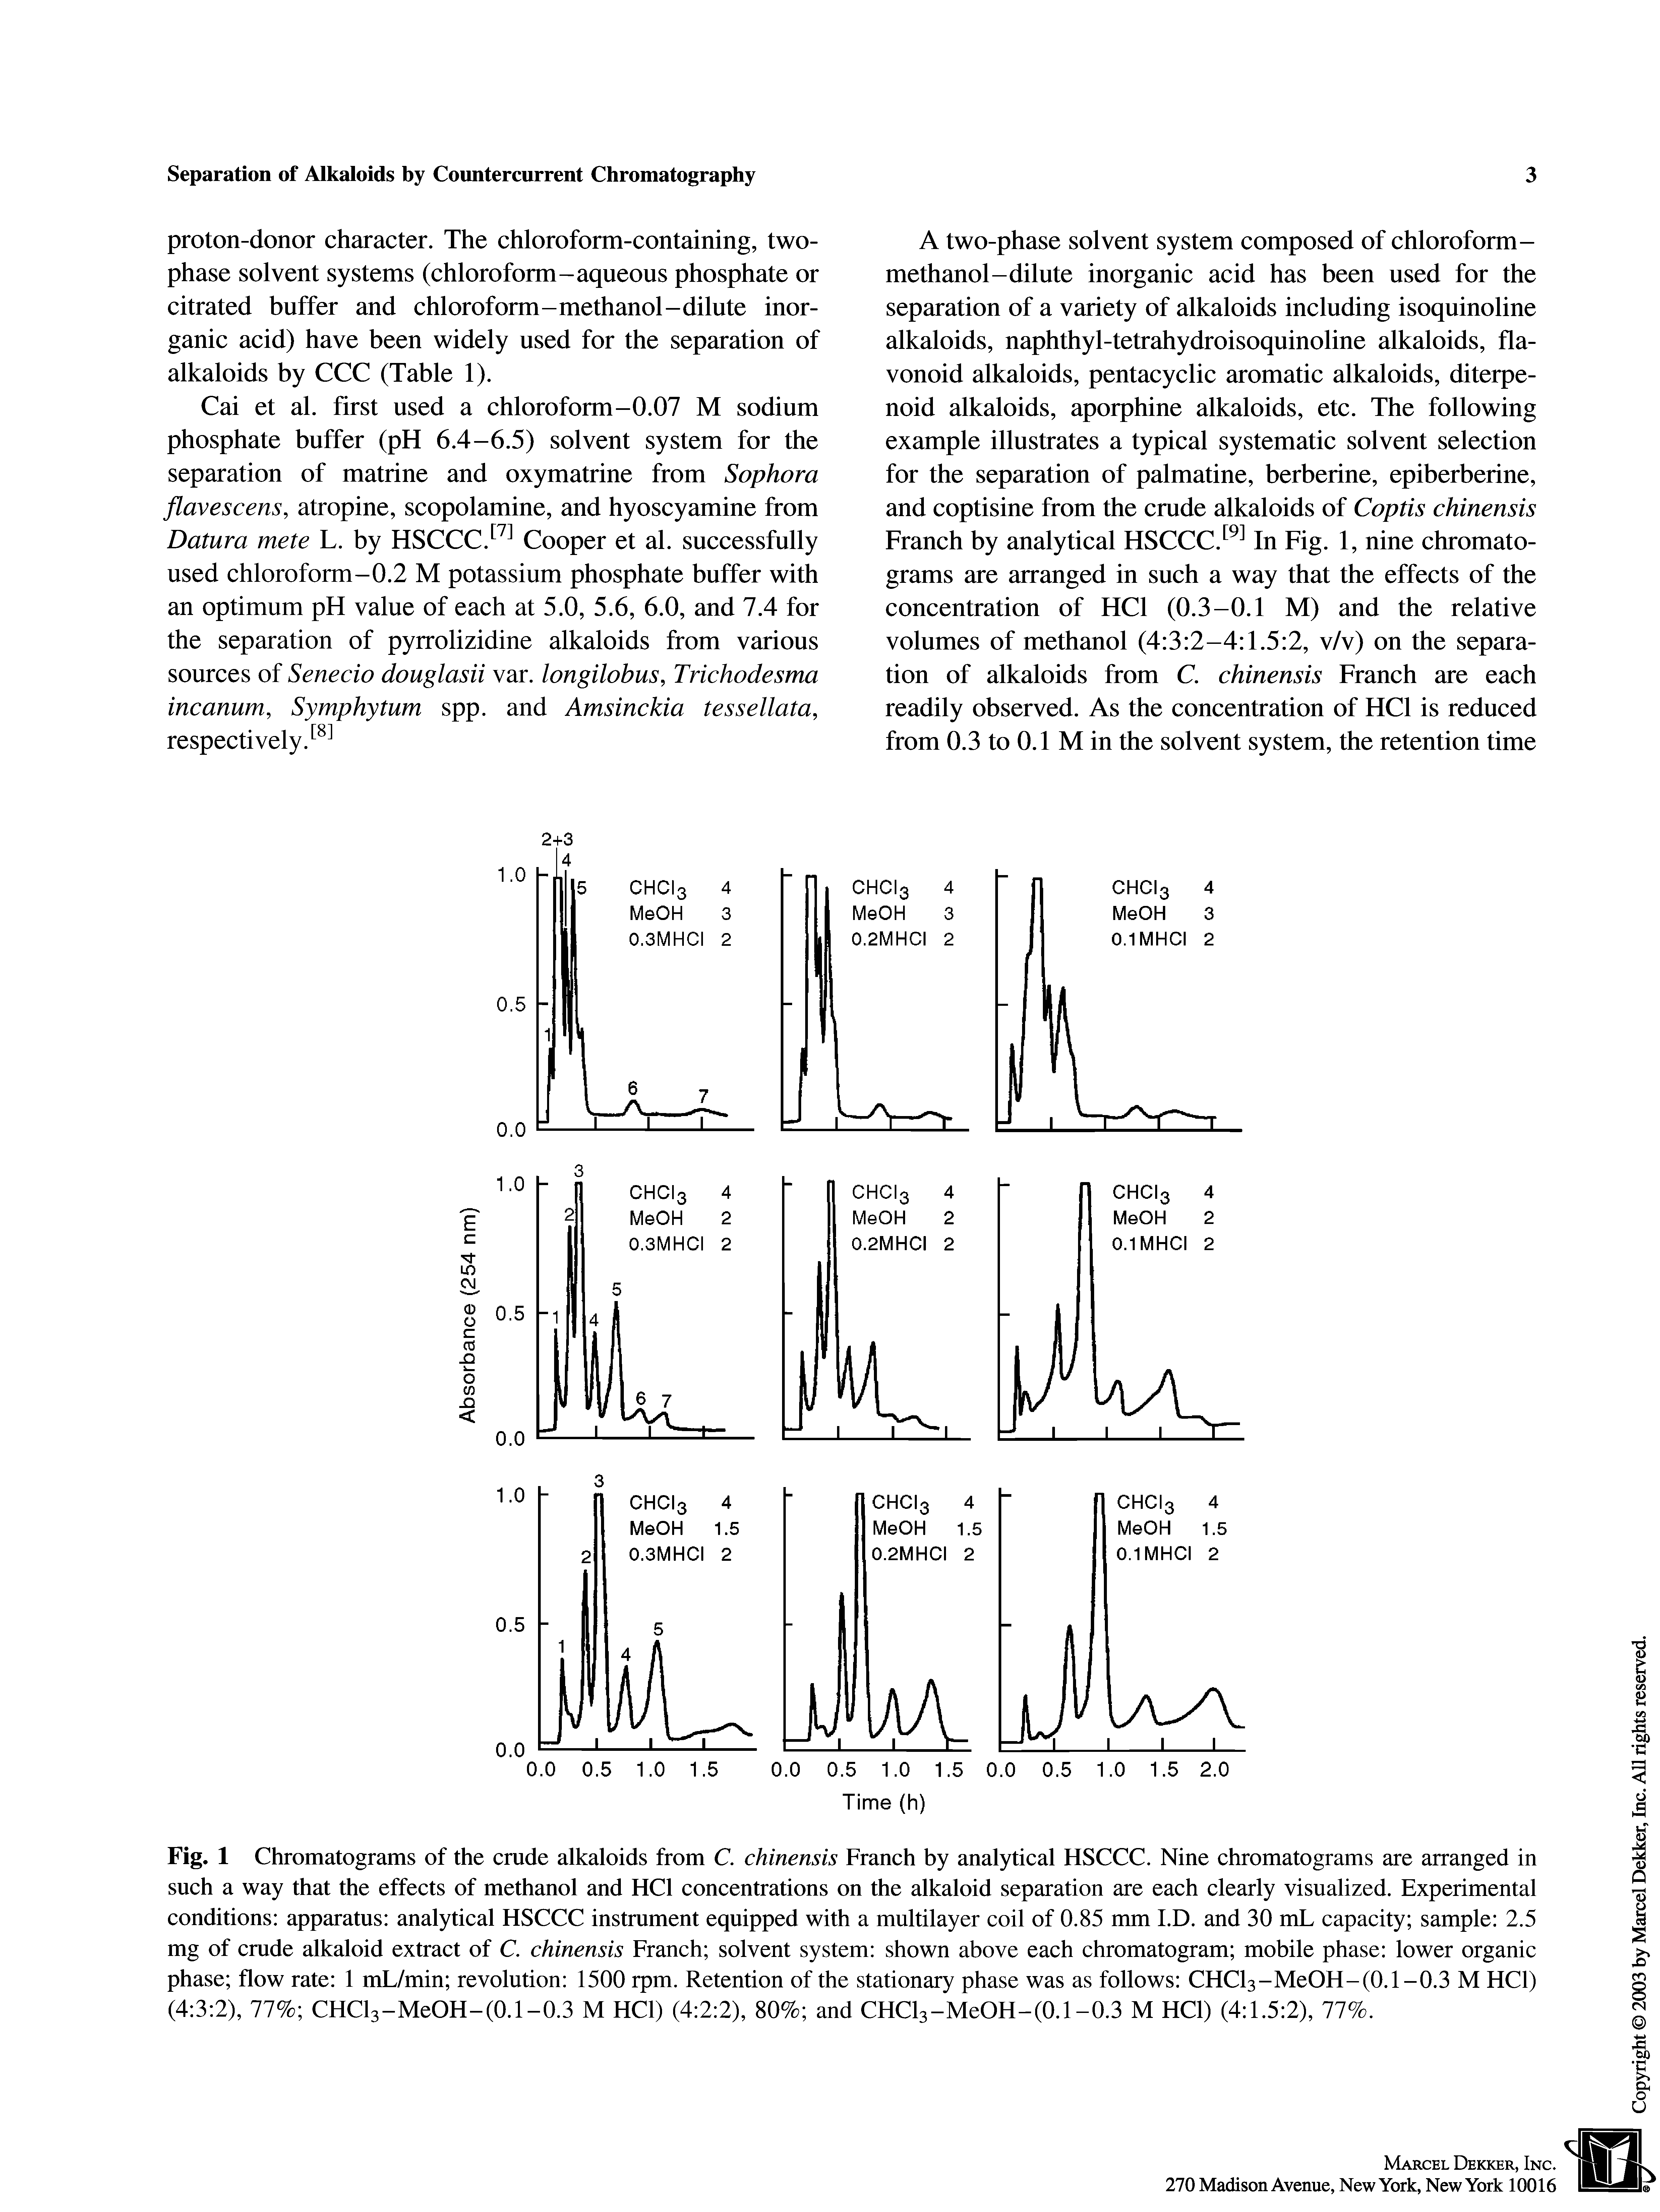 Fig. 1 Chromatograms of the crude alkaloids from C. chinensis Franch by analytical HSCCC. Nine chromatograms are arranged in such a way that the effects of methanol and HCl concentrations on the alkaloid separation are each clearly visualized. Experimental conditions apparatus analytical HSCCC instrument equipped with a multilayer coil of 0.85 mm I.D. and 30 mL capacity sample 2.5 mg of crude alkaloid extract of C. chinensis Franch solvent system shown above each chromatogram mobile phase lower organic phase flow rate 1 mL/min revolution 1500 rpm. Retention of the stationary phase was as follows CHCI3-MeOH-(0.1-0.3 M HCl) (4 3 2), 77% CHCI3-MeOH-(0.1-0.3 M HCl) (4 2 2), 80% and CHCl3-MeOH-(0.1-0.3 M HCl) (4 1.5 2), 77%.